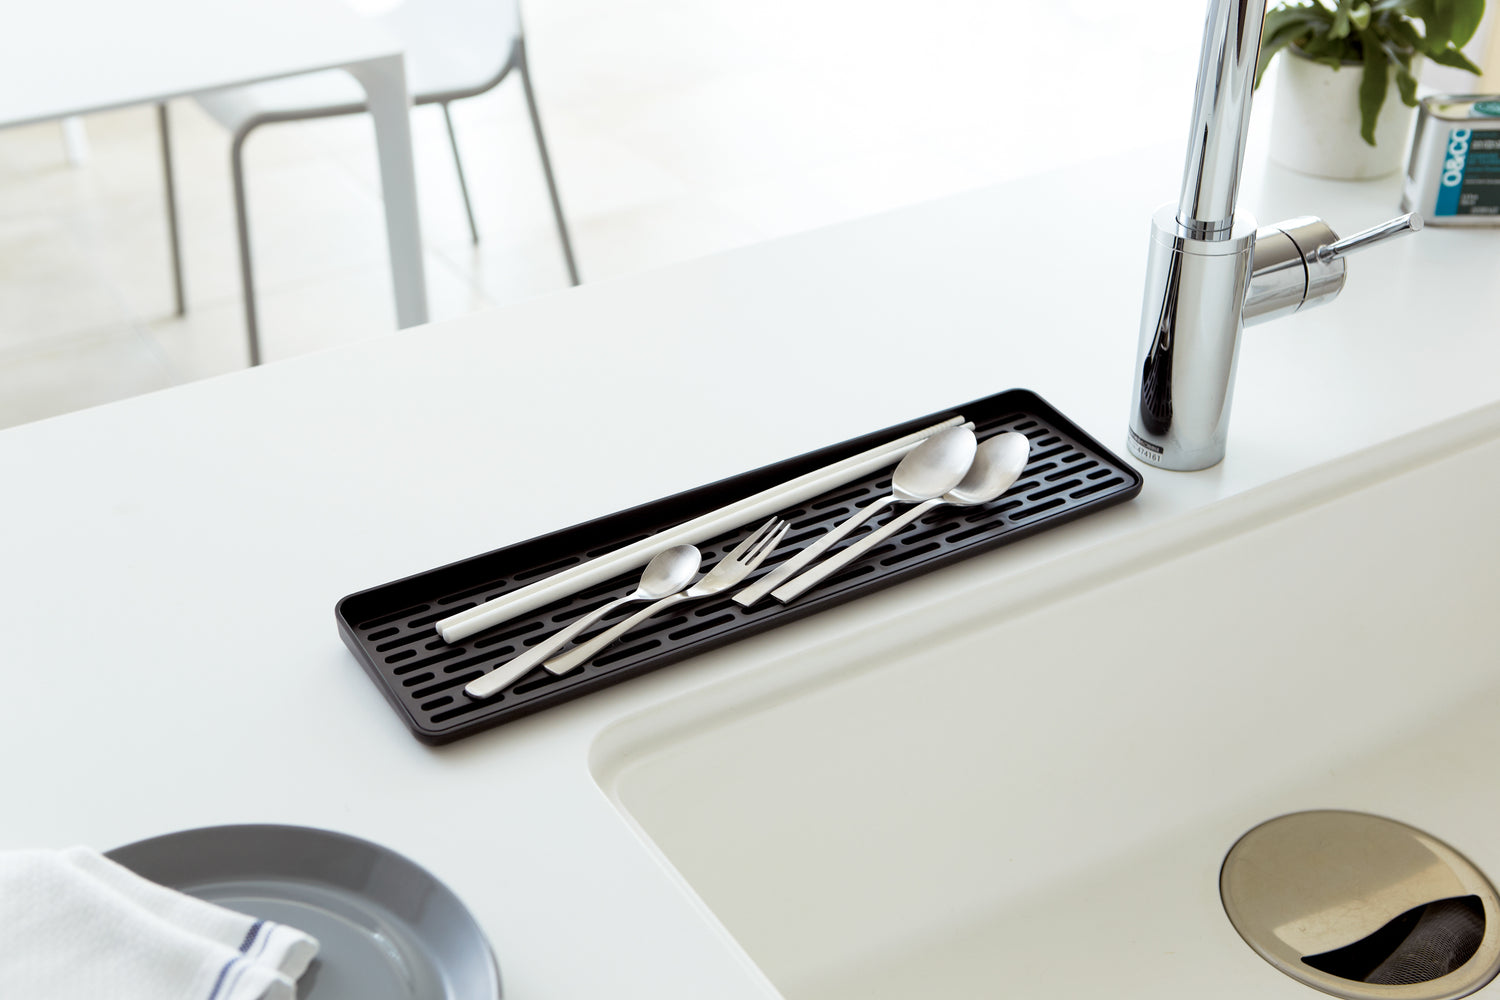 View 11 - Black Sink Drainer Tray holding silverware on sink countertop by Yamazaki Home.